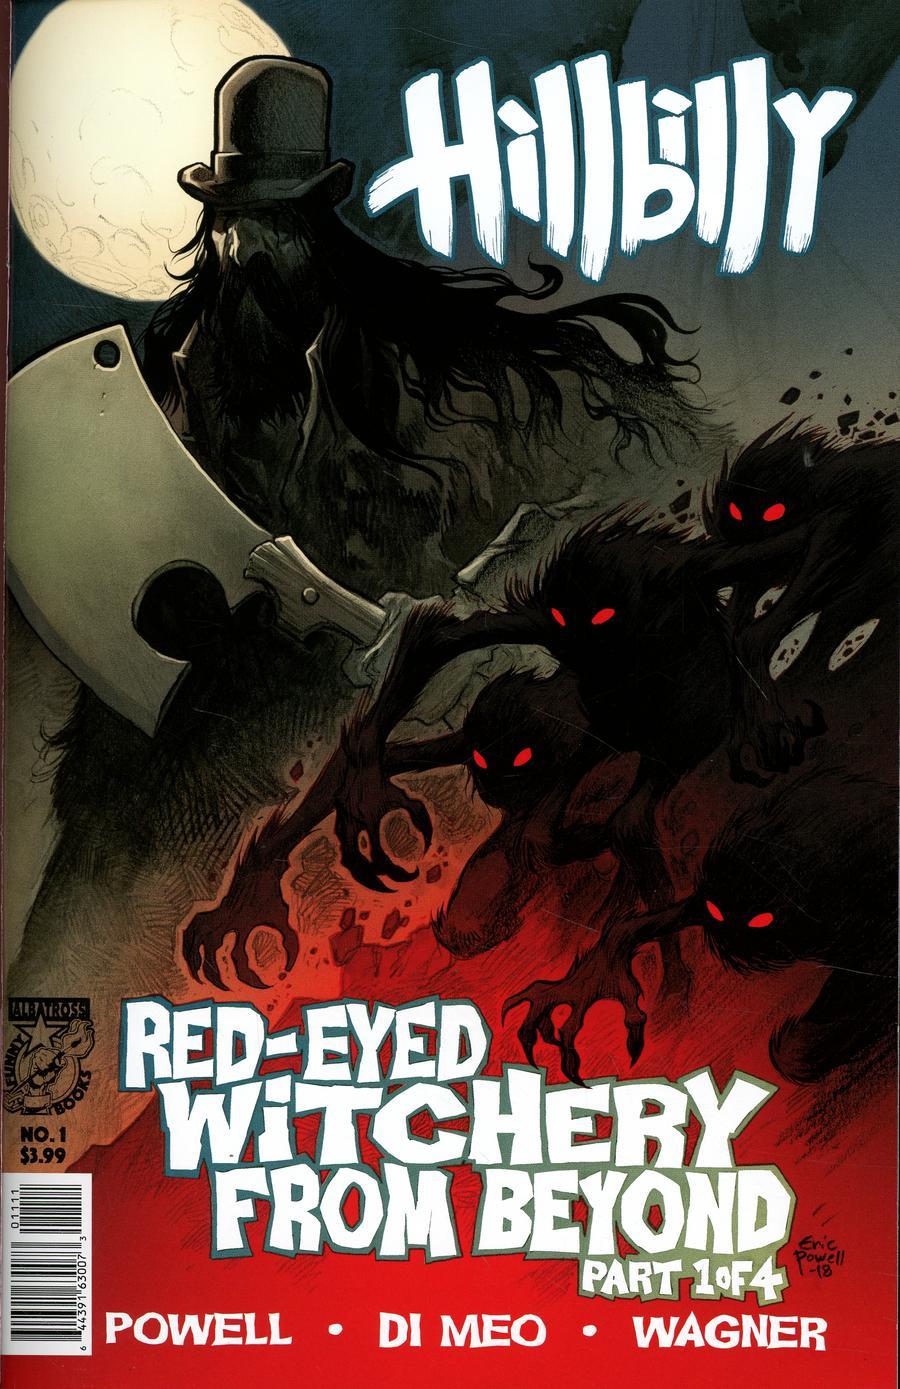 Hillbilly Red-Eyed Witchery From Beyond Vol. 1 #1